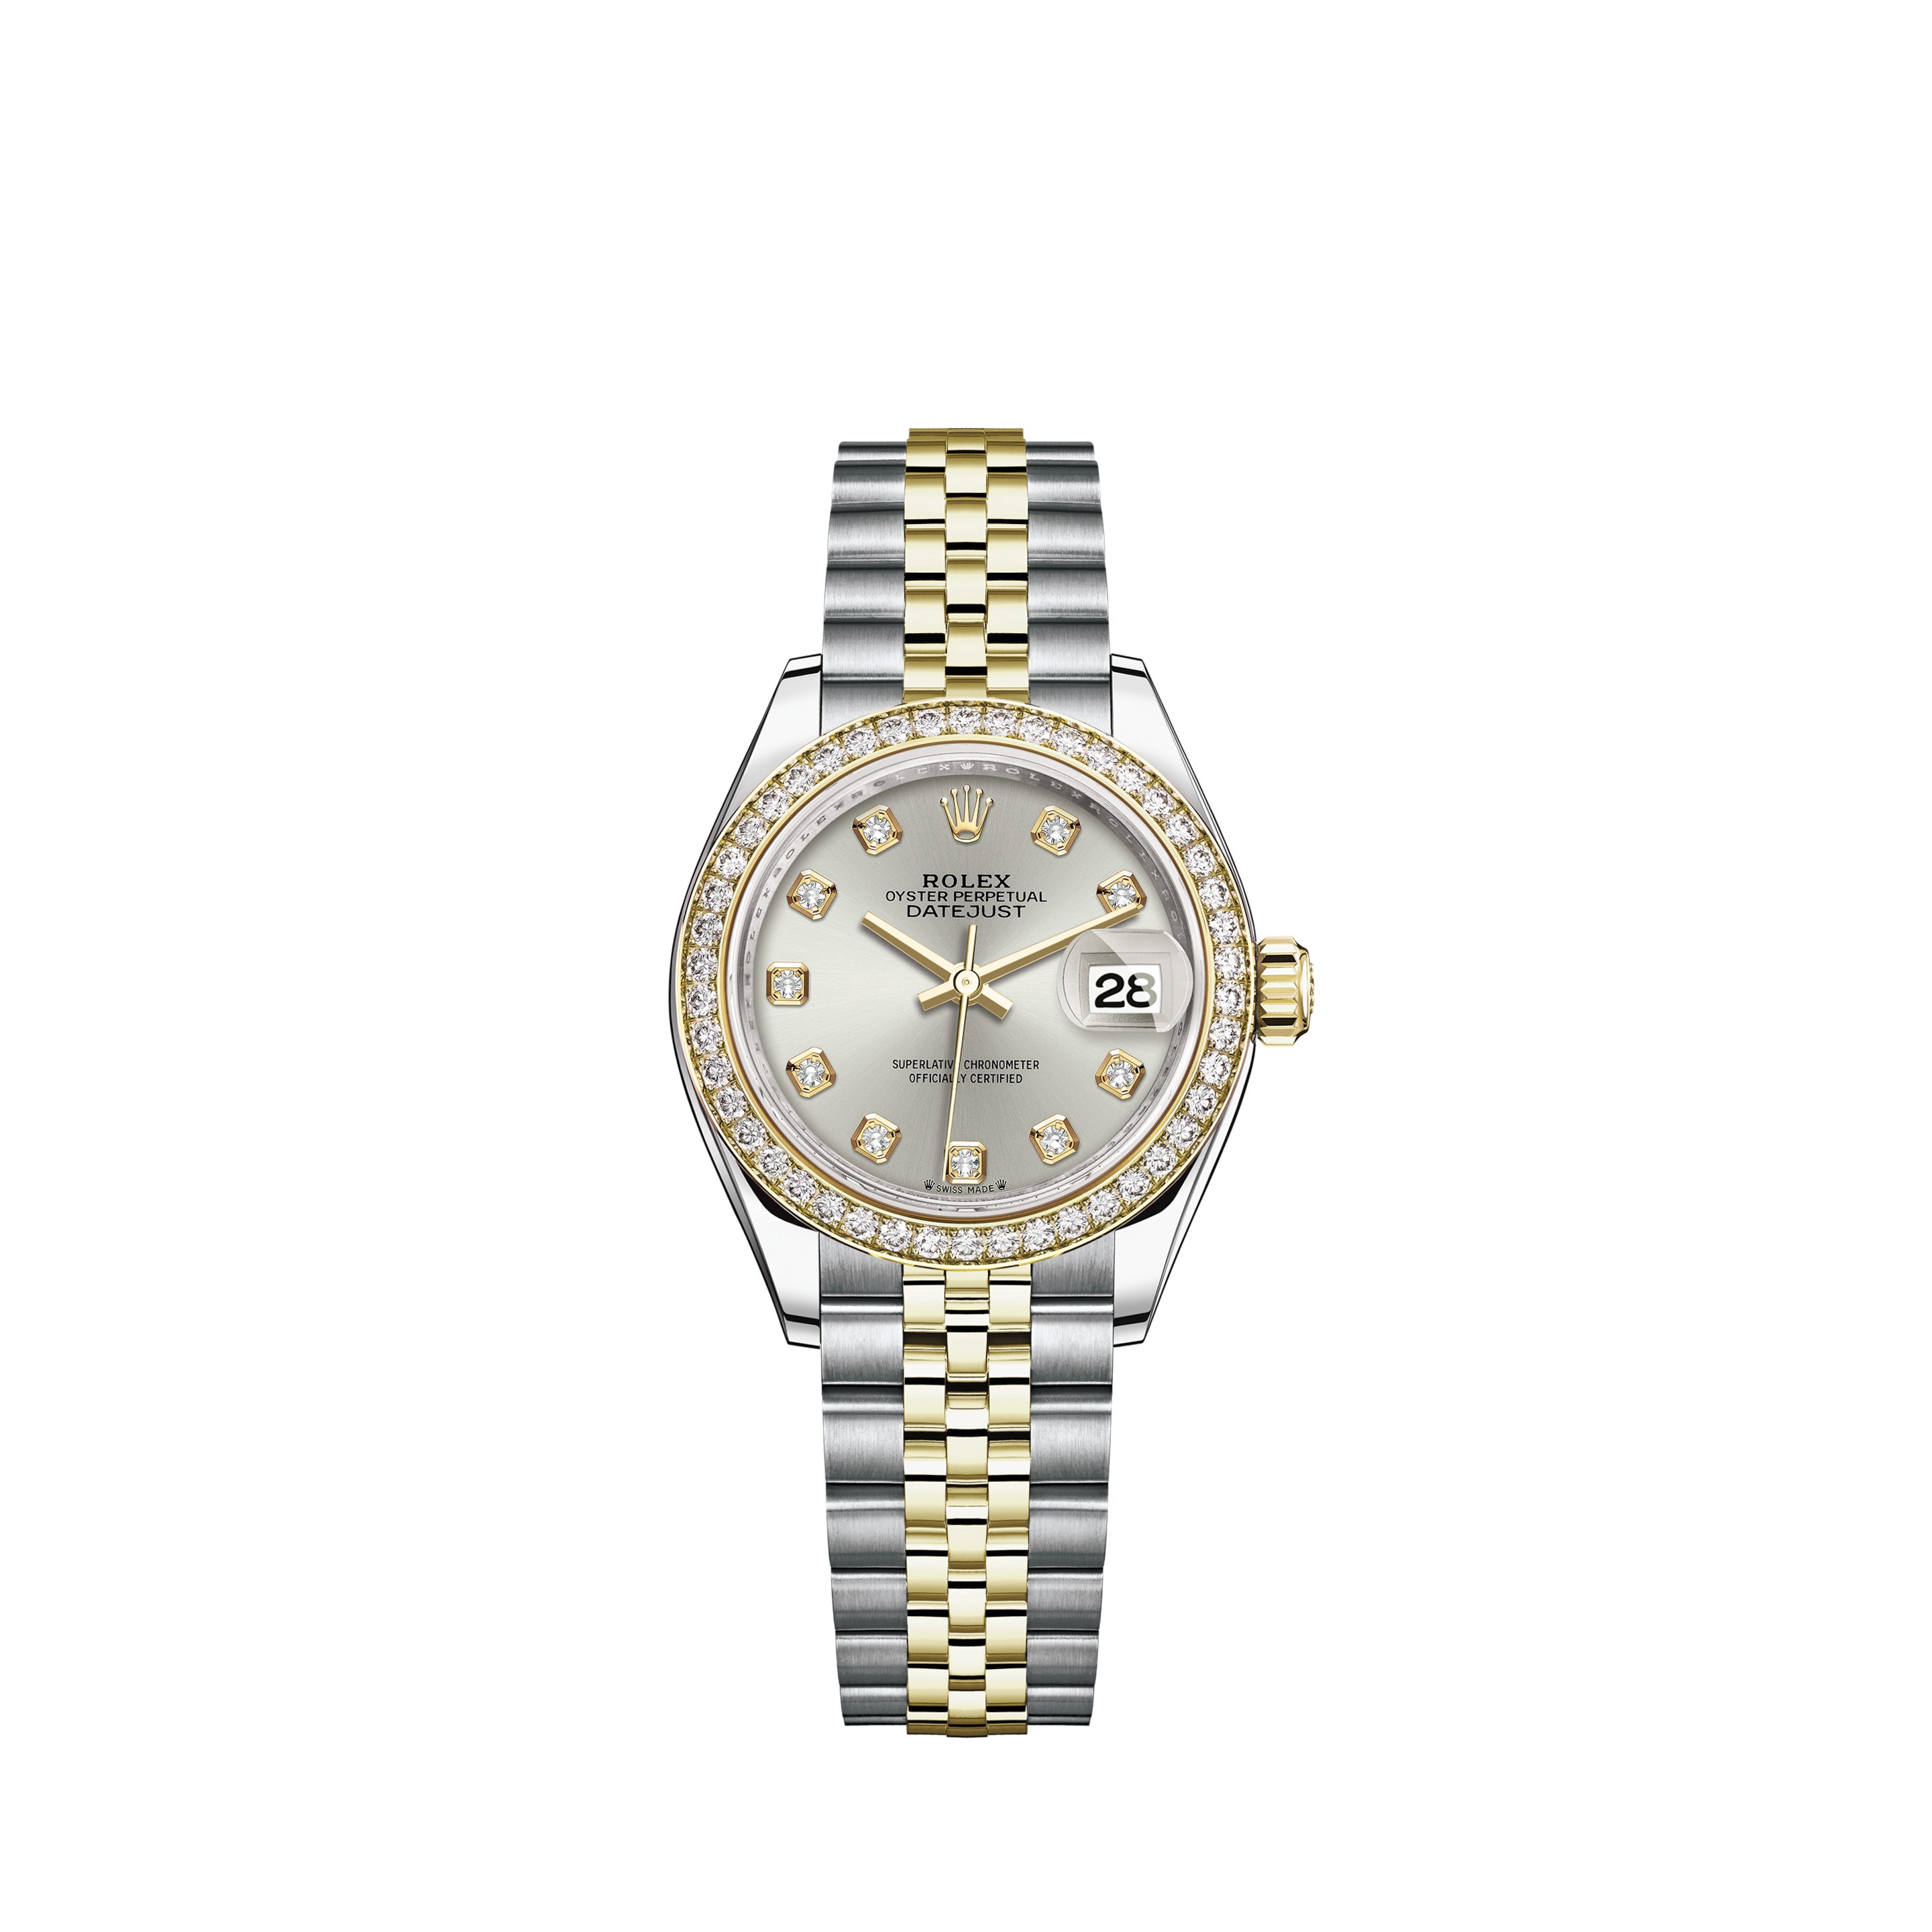 Rolex Oyster Perpetual Datejust 36 126231 in Oystersteel and Everose gold features a white dial